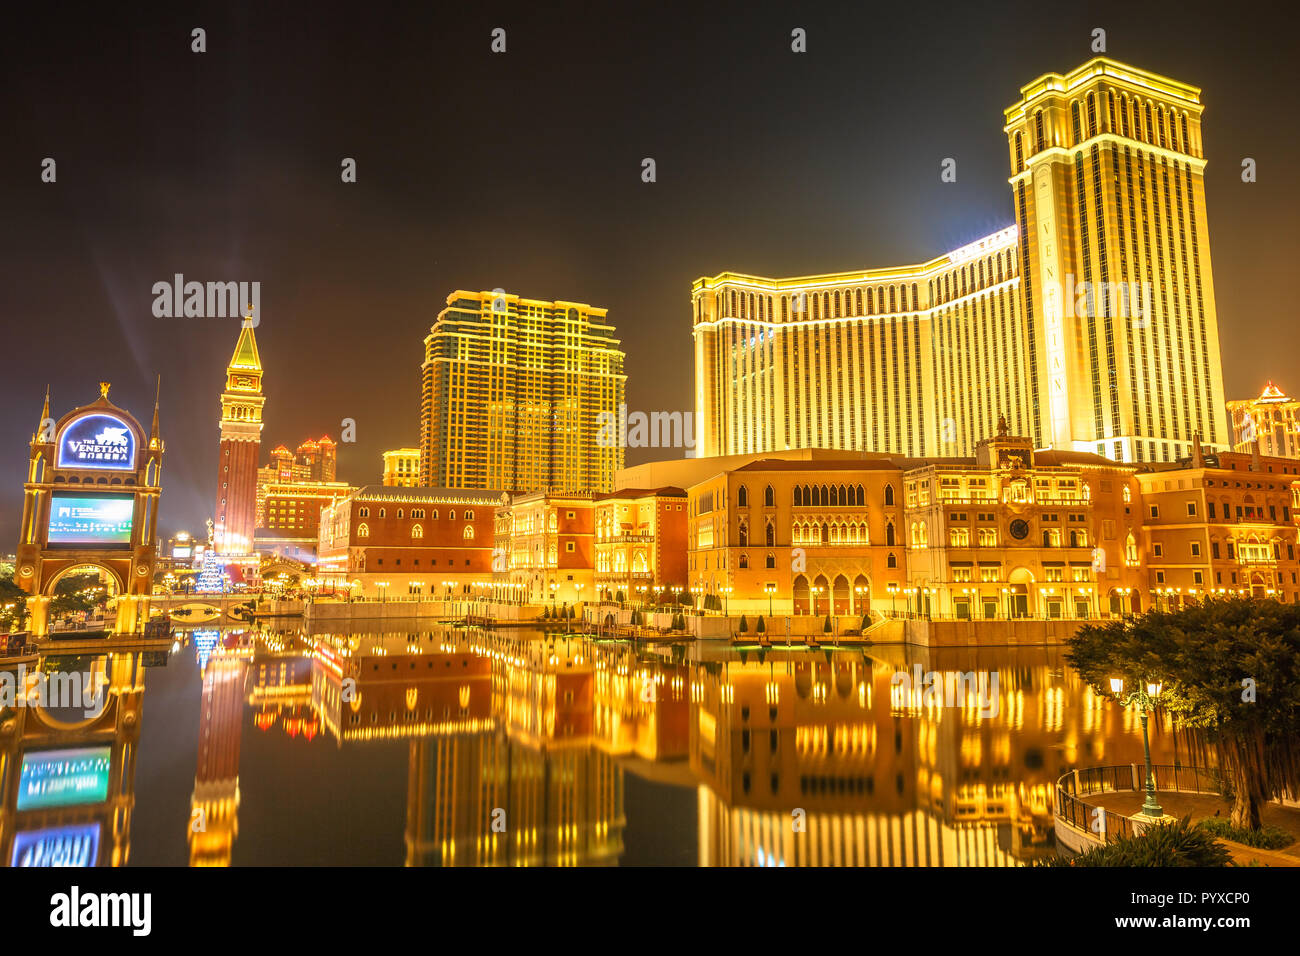 Macau, China - December 9, 2016: Venetian Macao by night, golden colors of this resort and Casino at night seen from Galaxy Cotai Strip. Gambling tourism is Macau's biggest source of revenue. Stock Photo